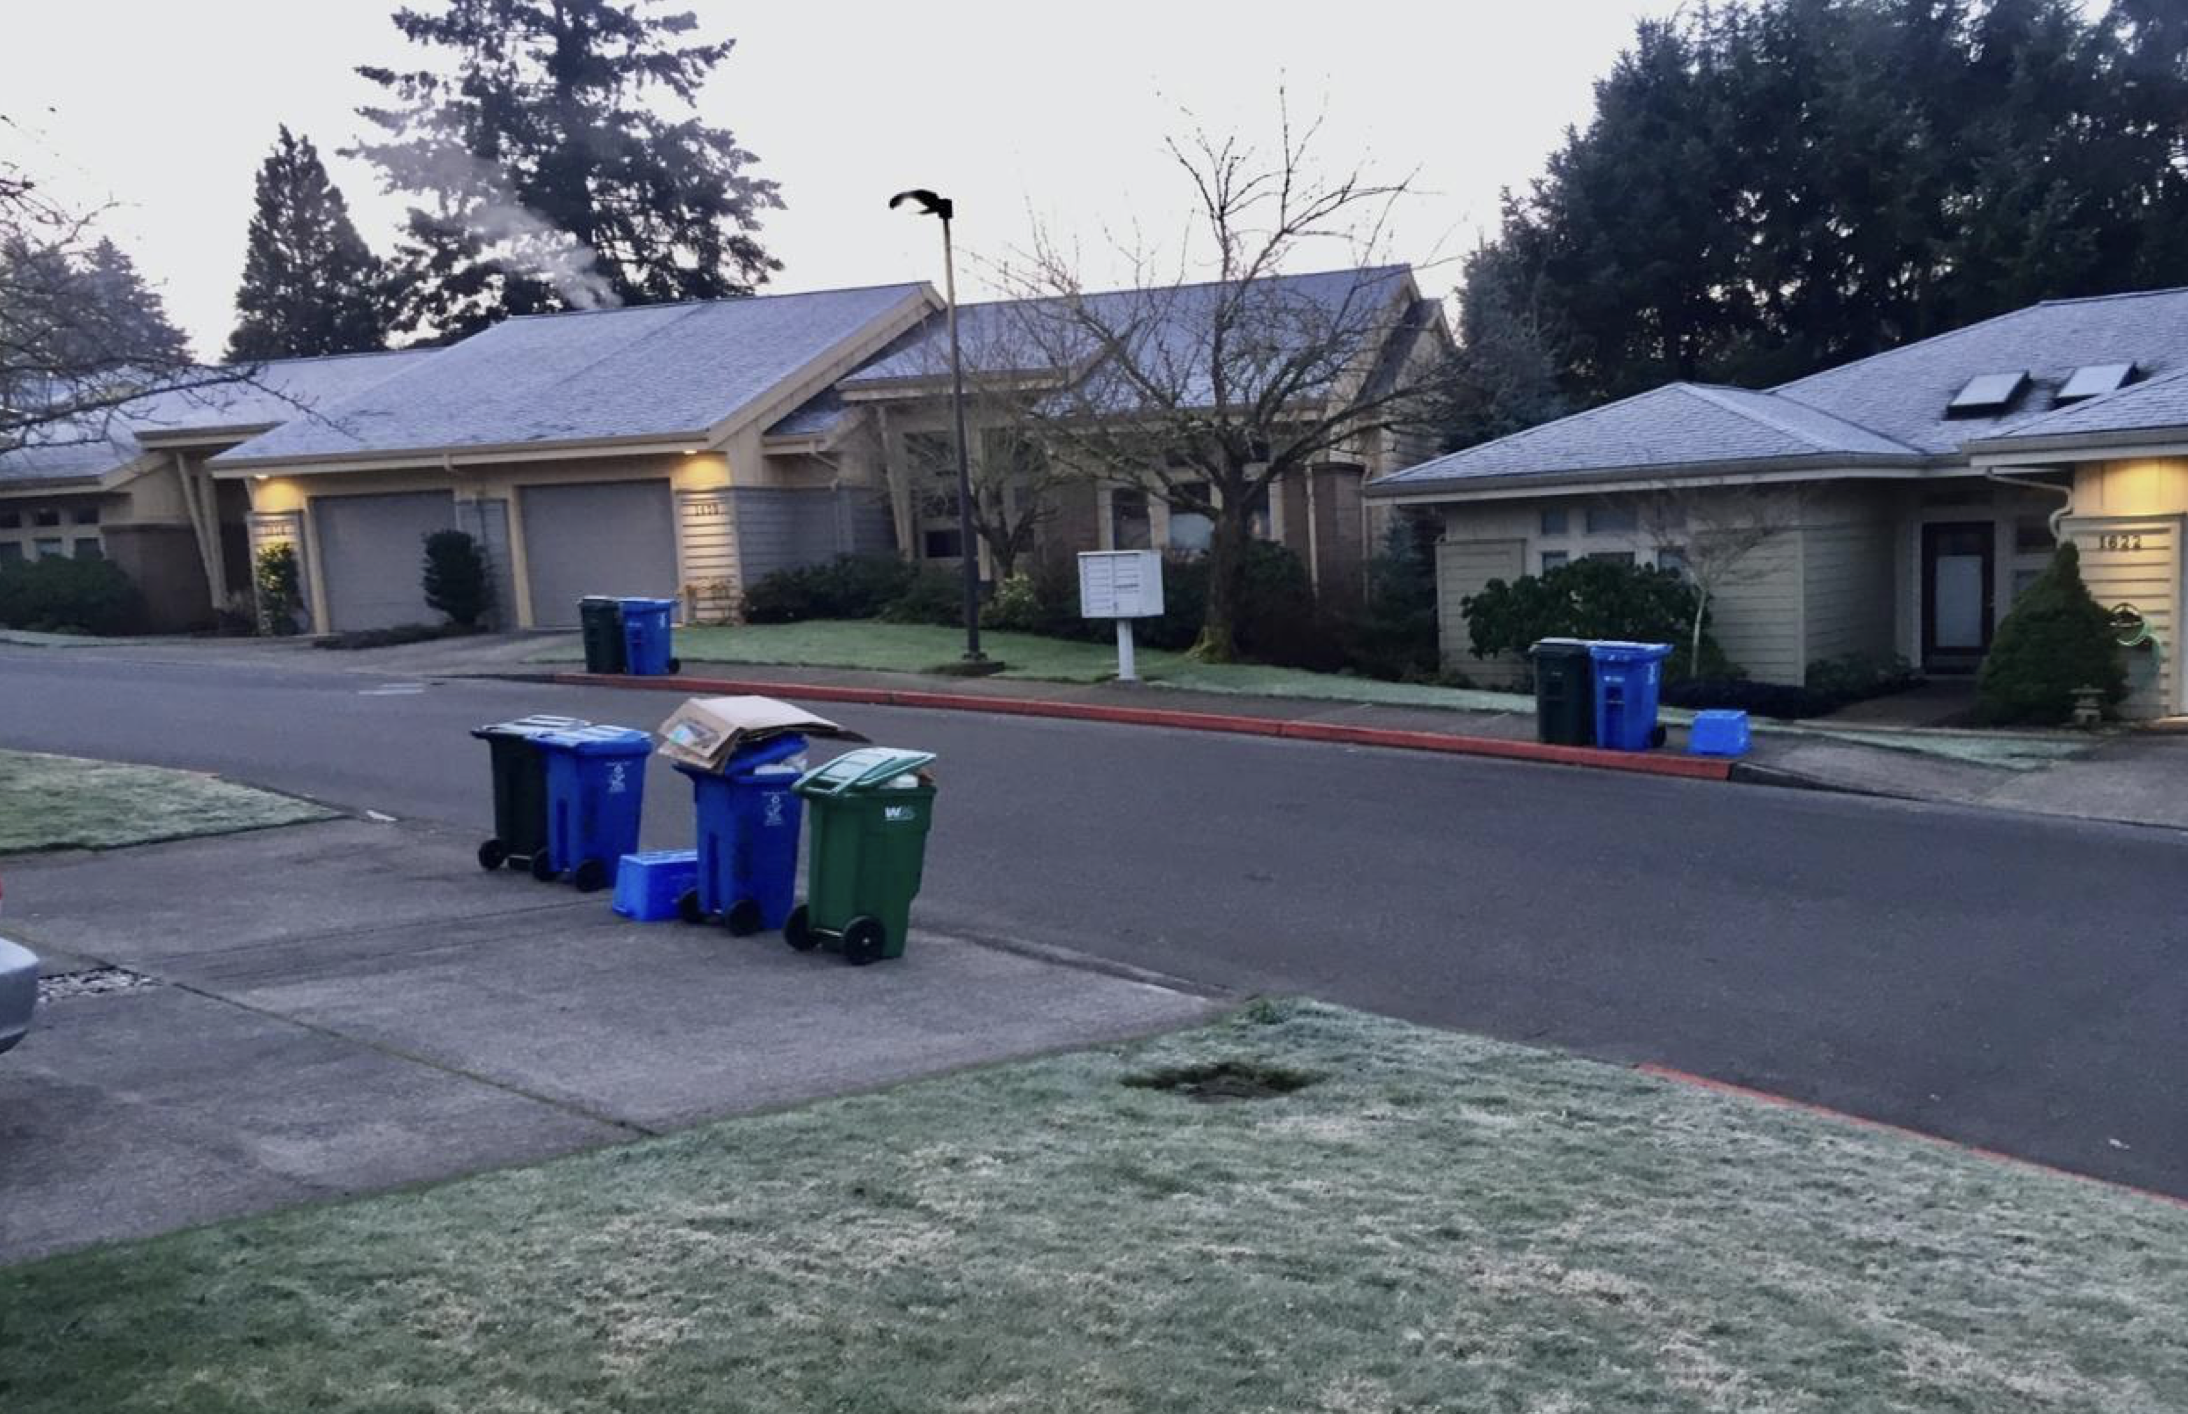 River Ridge street view with waste collection containers